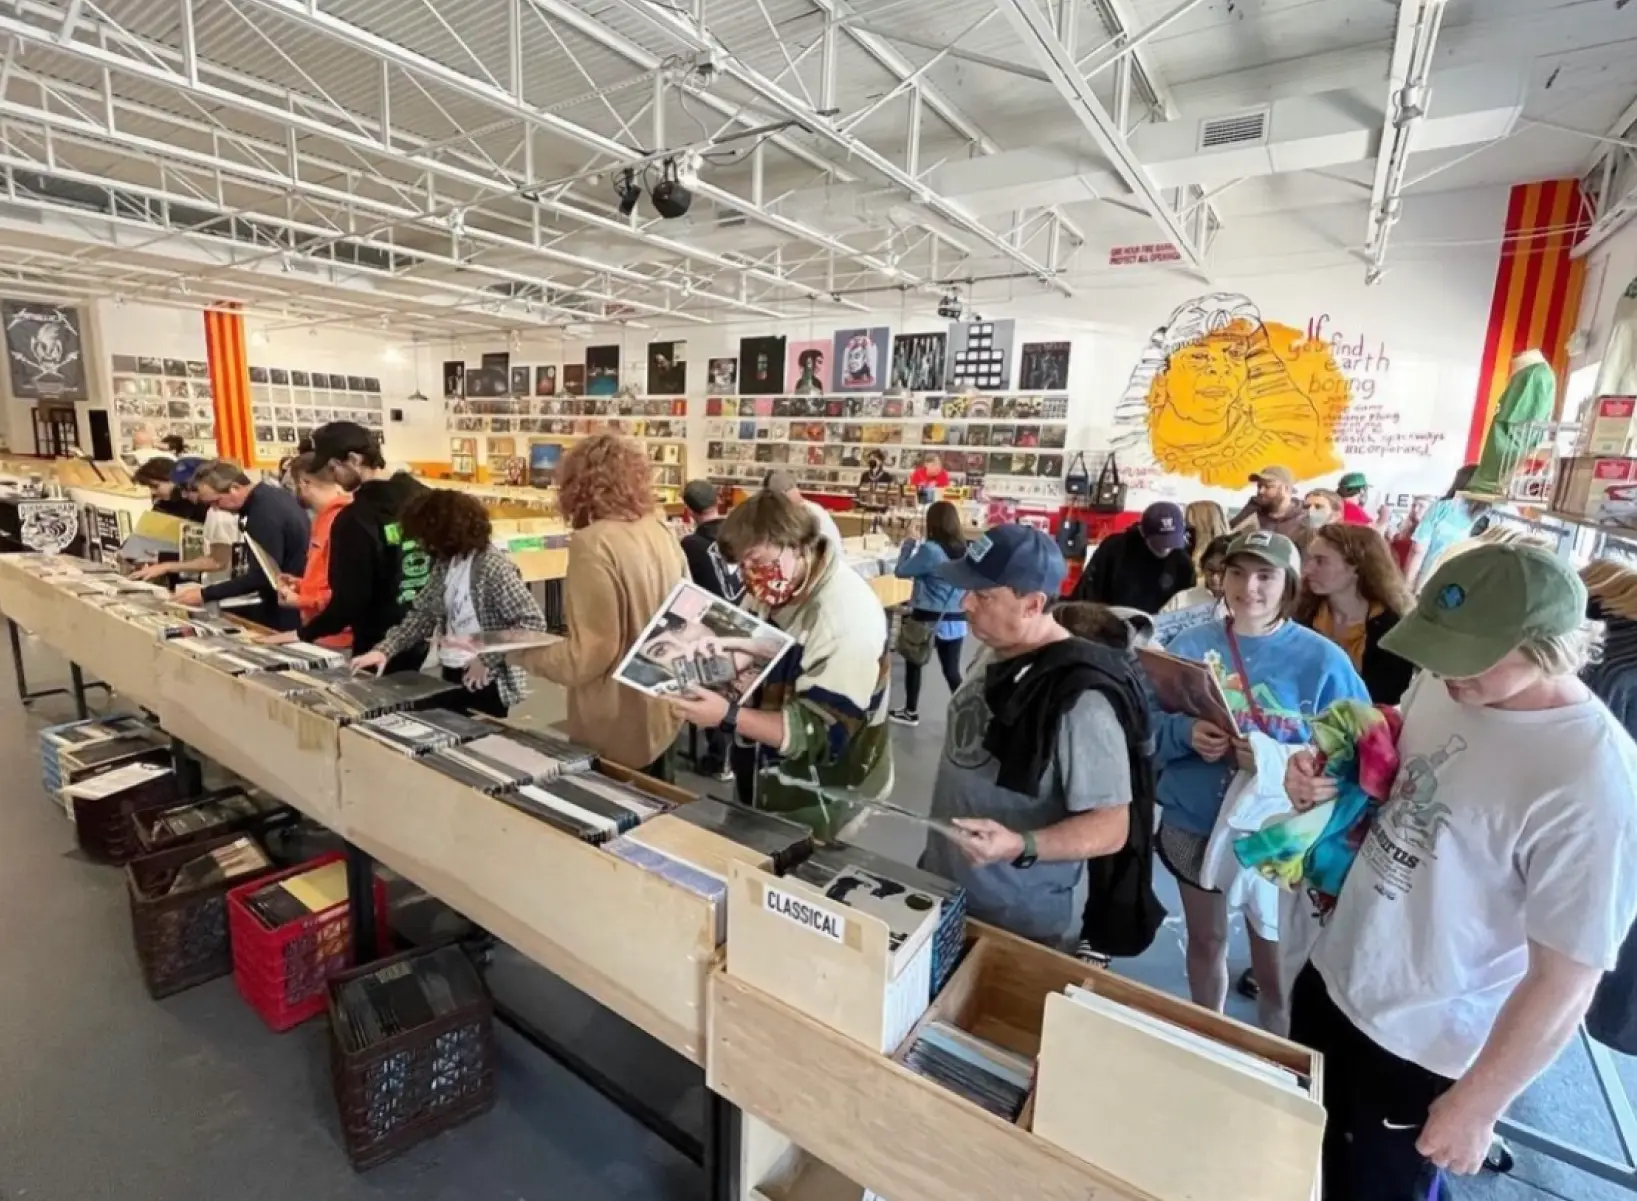 A large group of people browsing records at a record store.